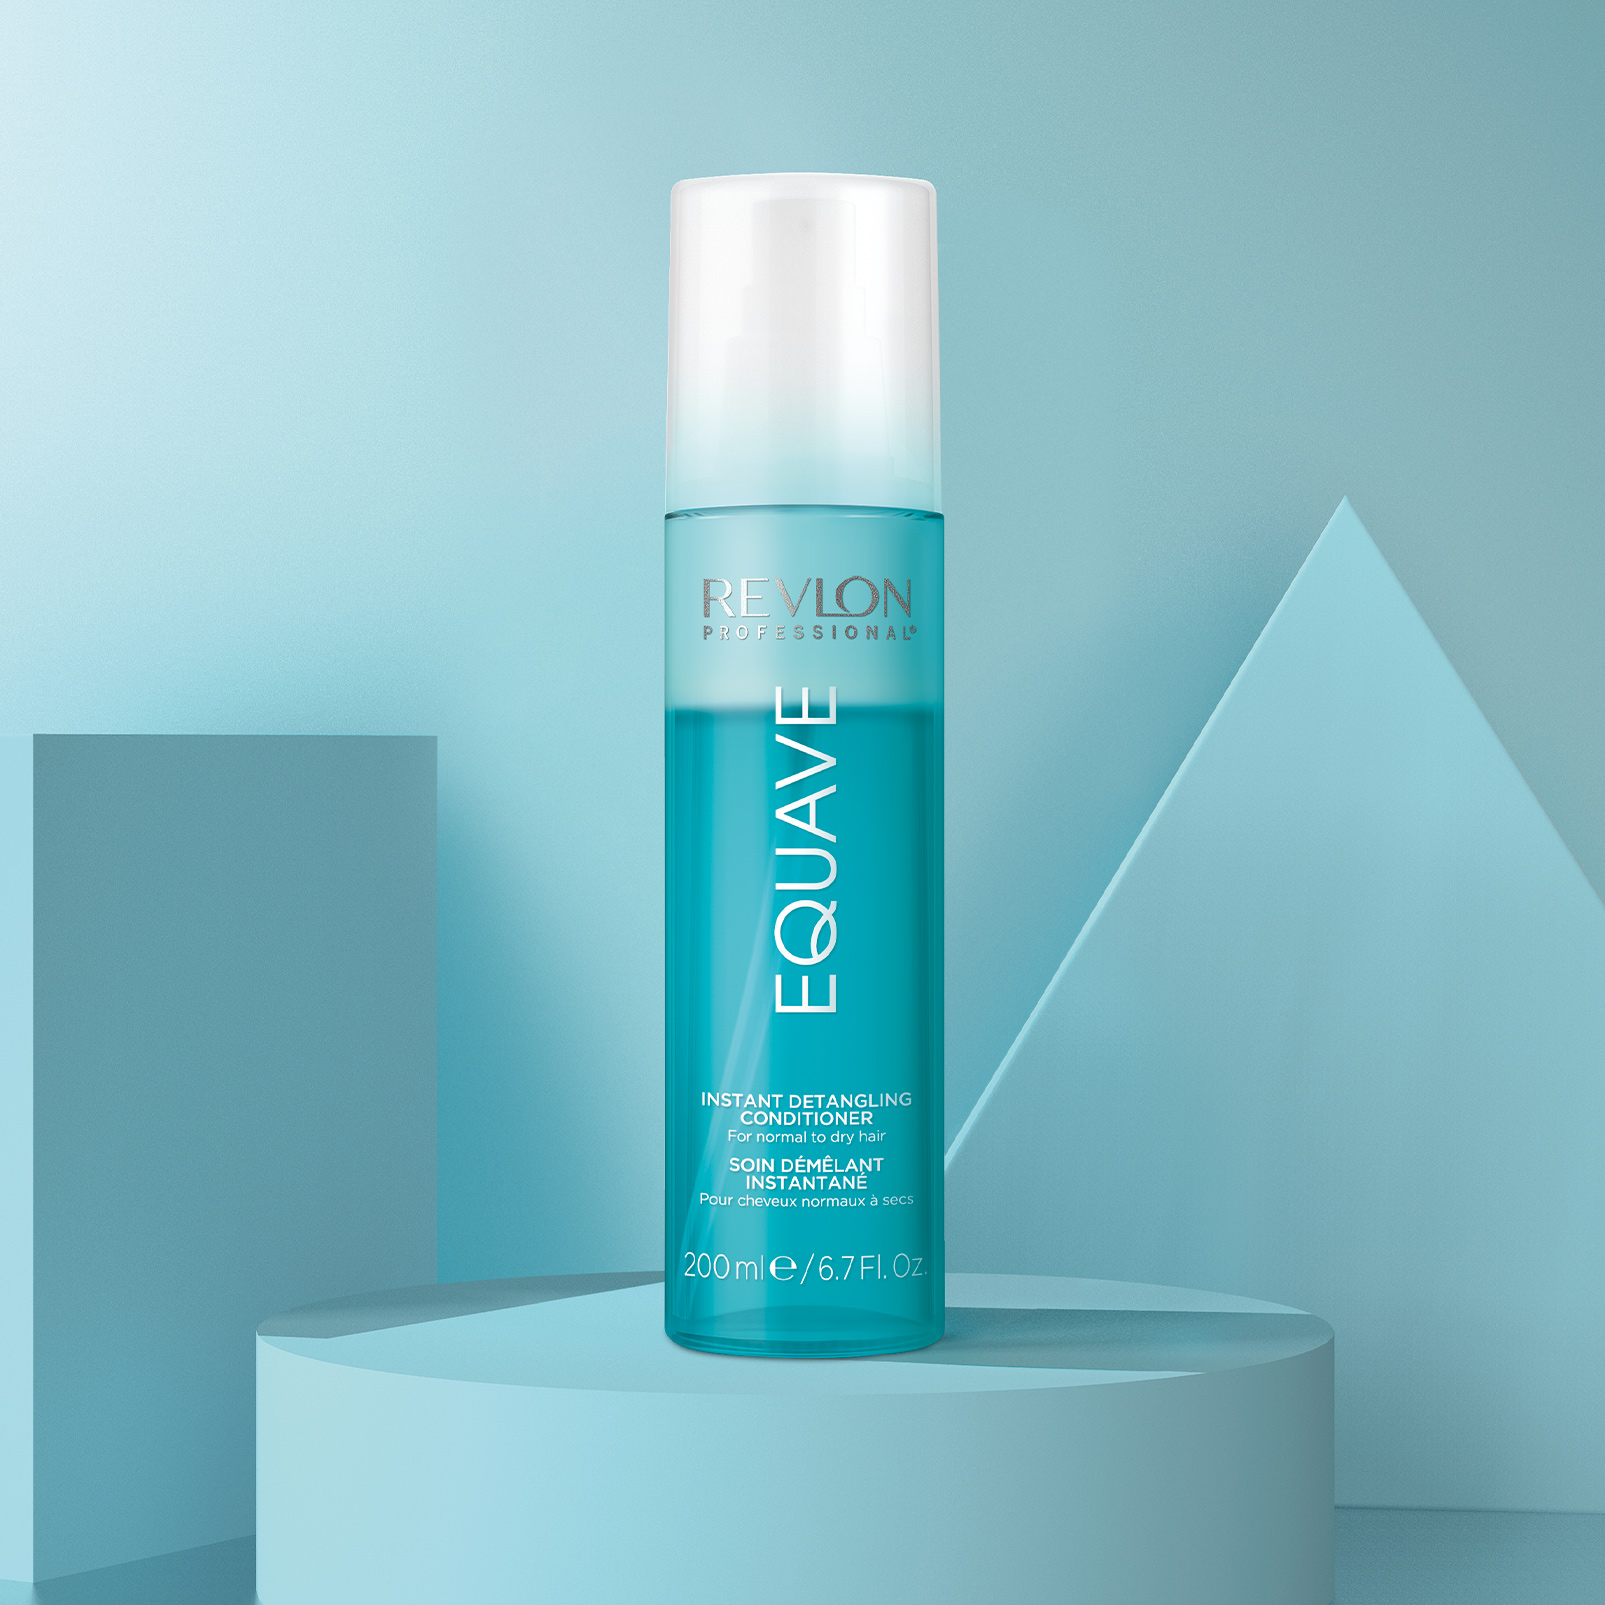 hair Leave-in - Revlon Professional Conditioner to Detangling Instant for Professional normal dry Equave™ Revlon